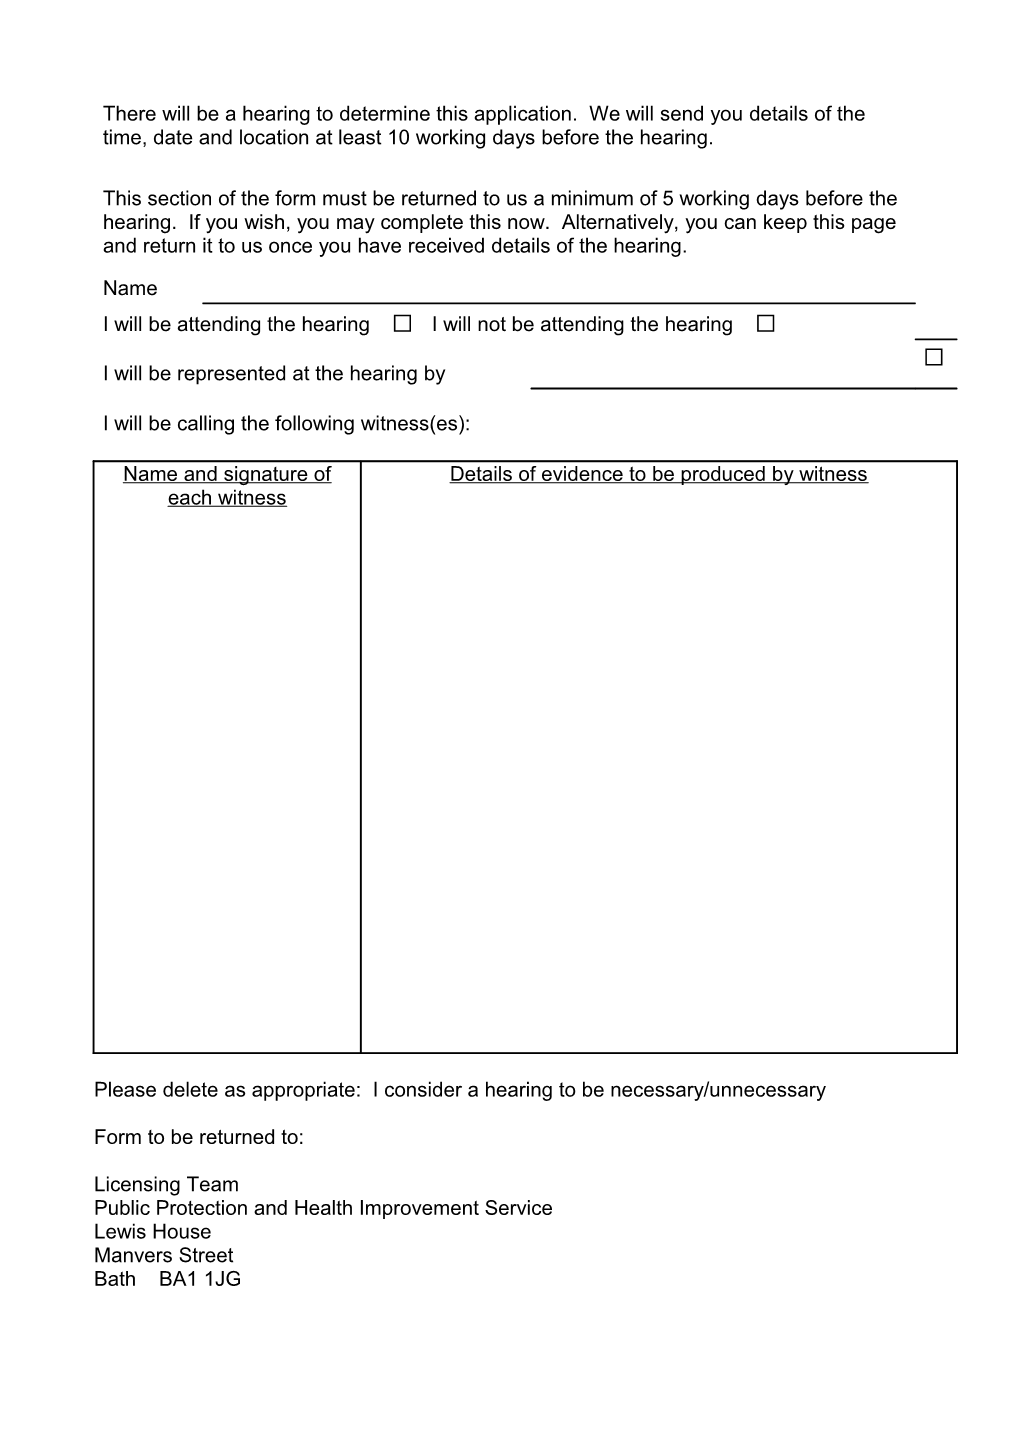 Please Read the Notes at the Back of This Form Prior to Completing It